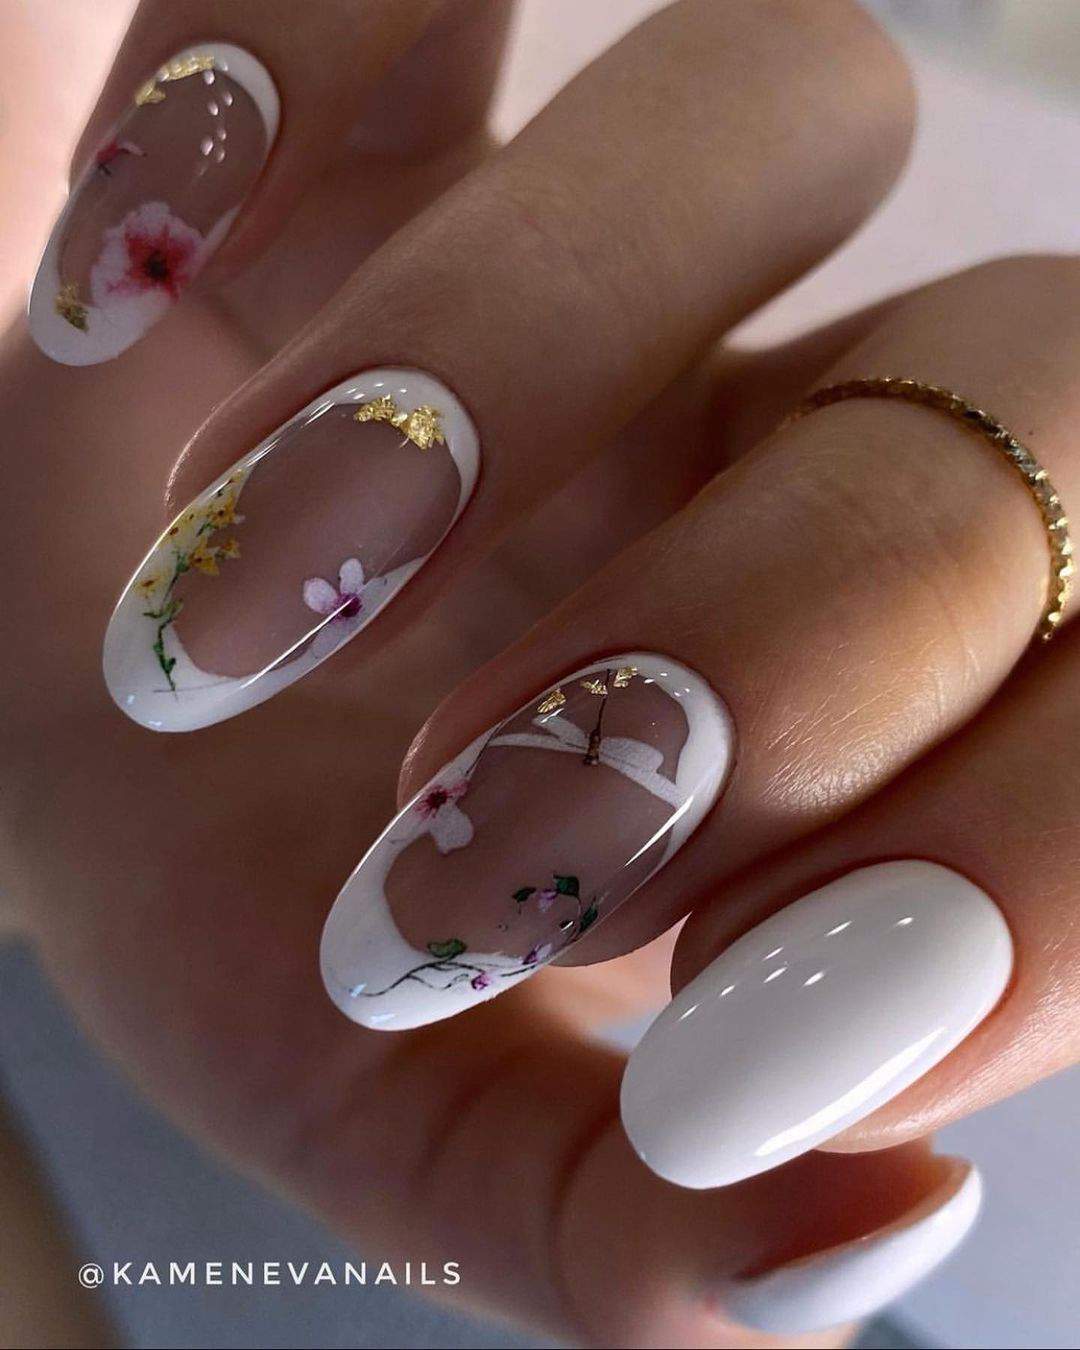 50 Best Nail Designs Trends To Try Out In 2022 images 28